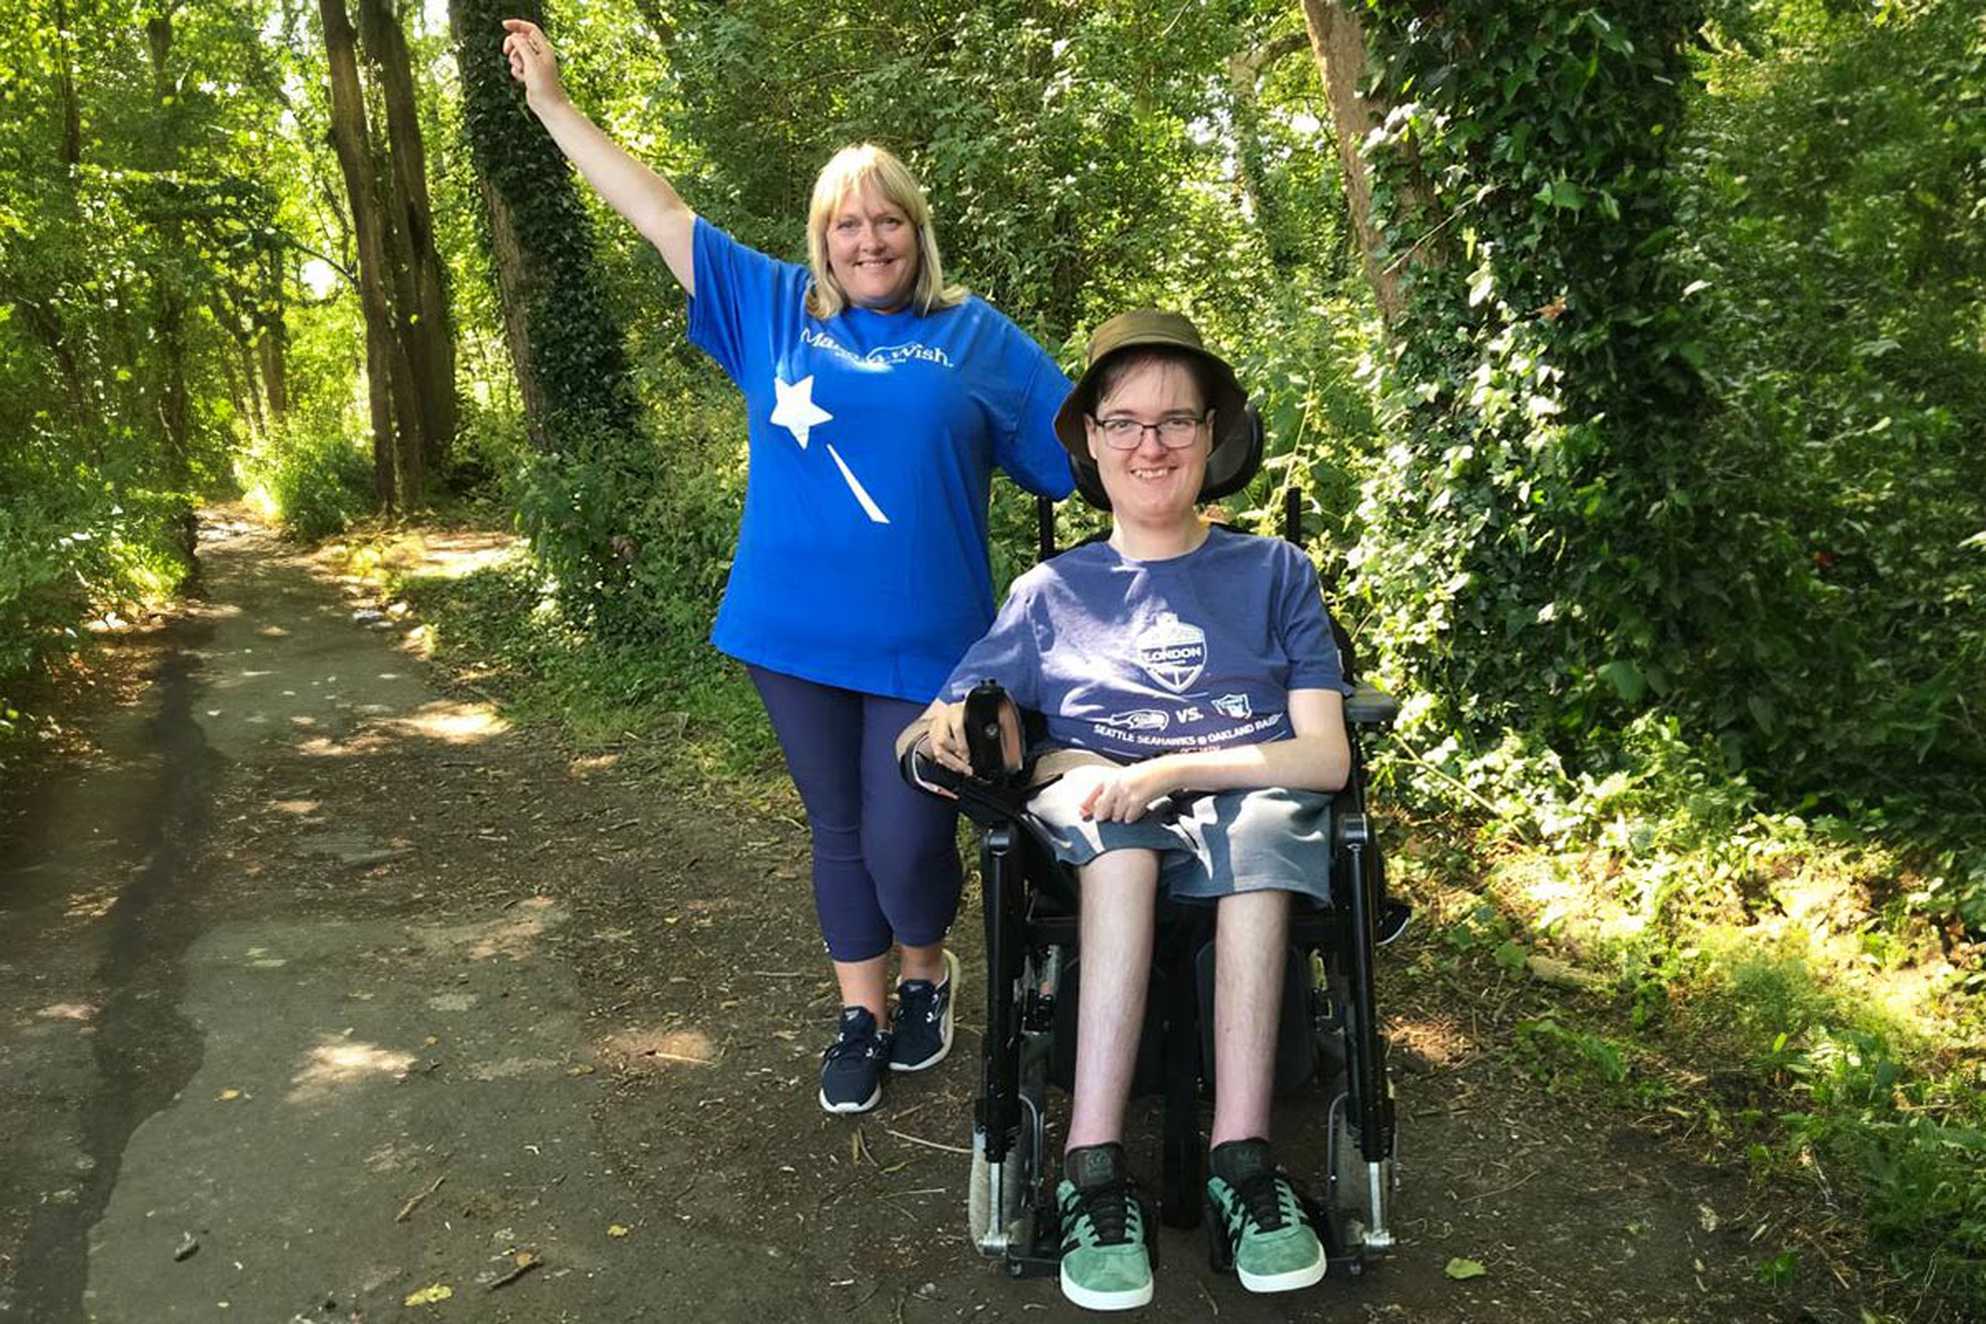 Jacob, now 19, and mum Kim taking part in a sponsored walk in support of Make-A-Wish.